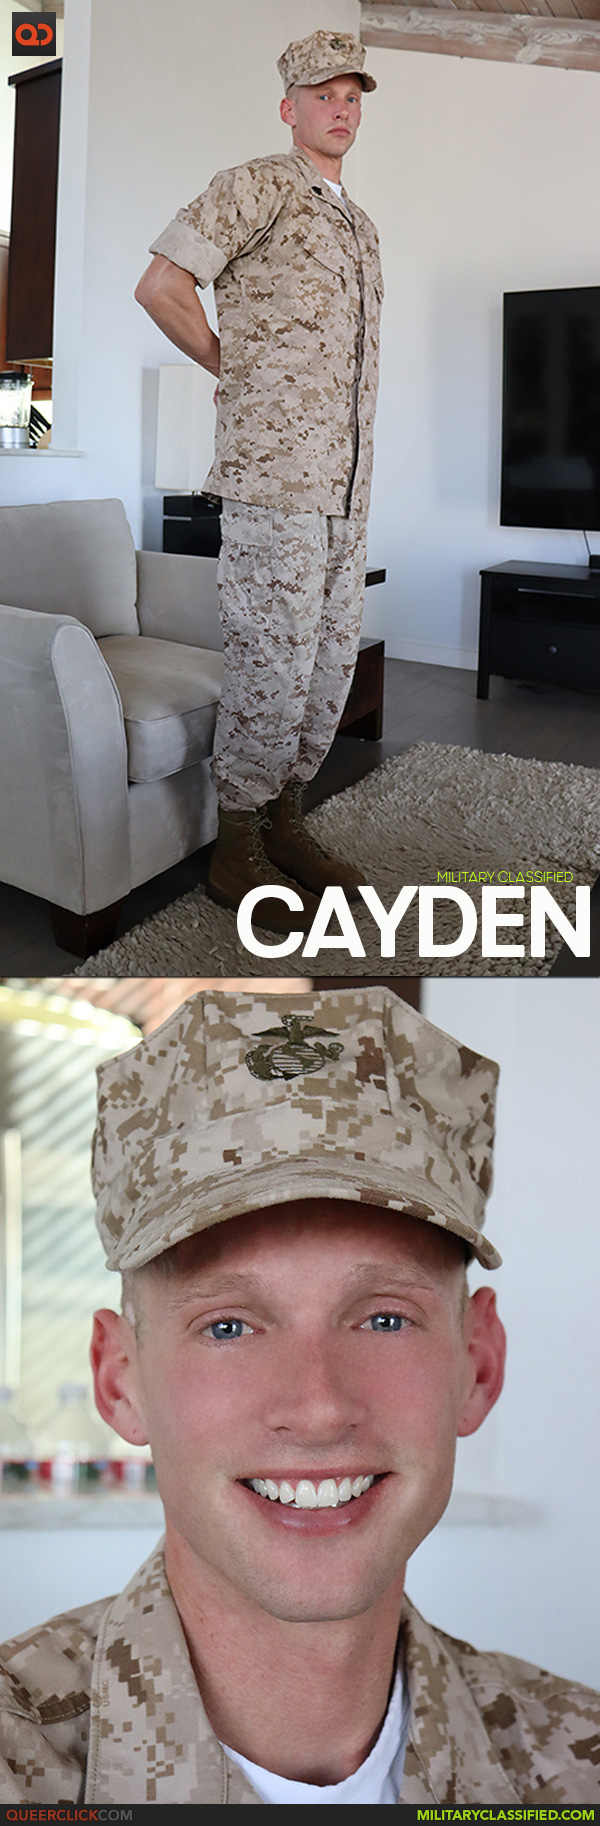 Military Classified: Cayden